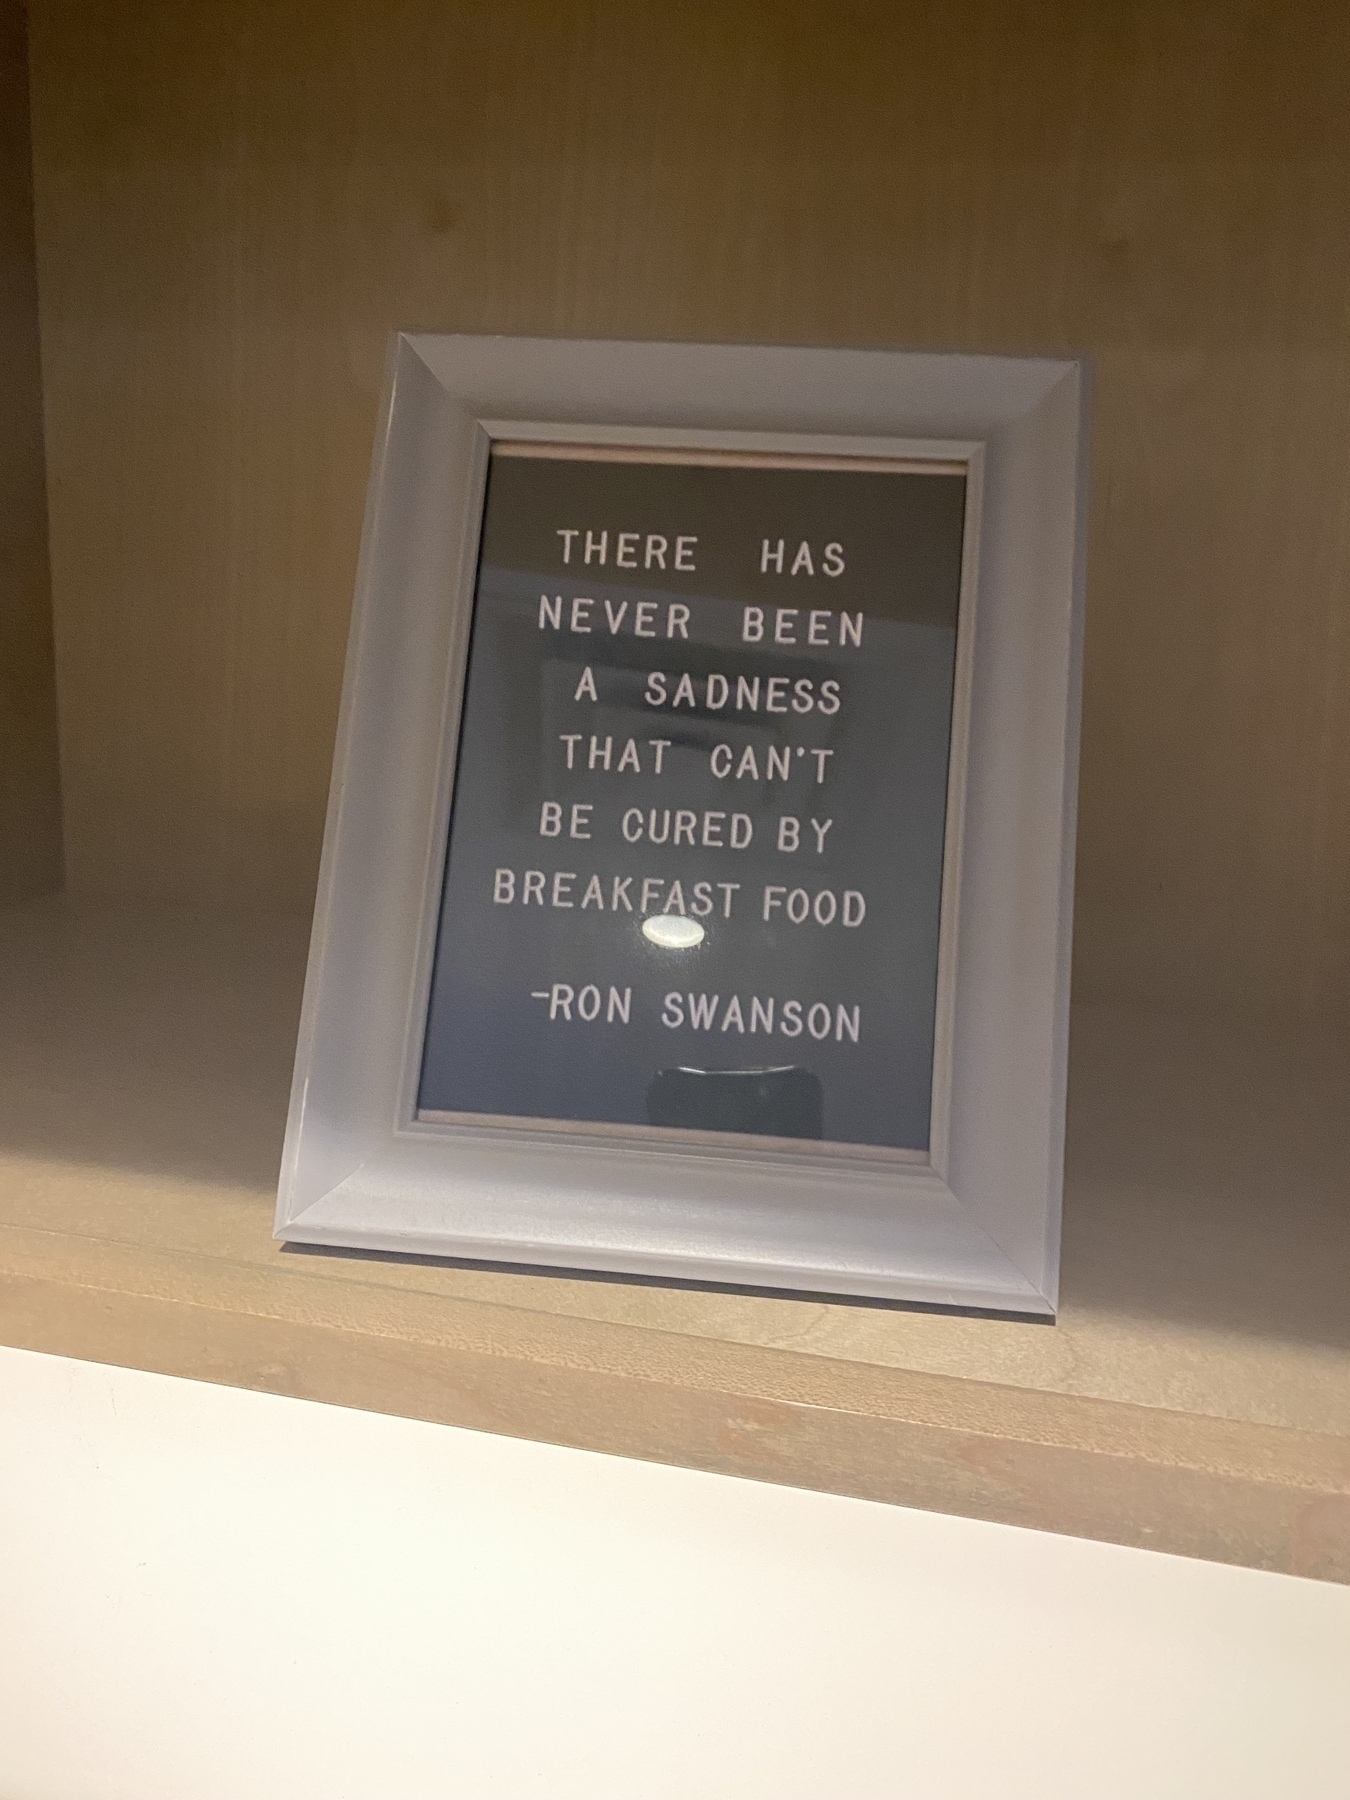 Poorly lit picture frame with quote from fictional character Ron Swanson. It reads “There has never been a sadness that can’t be cured by breakfast food.”